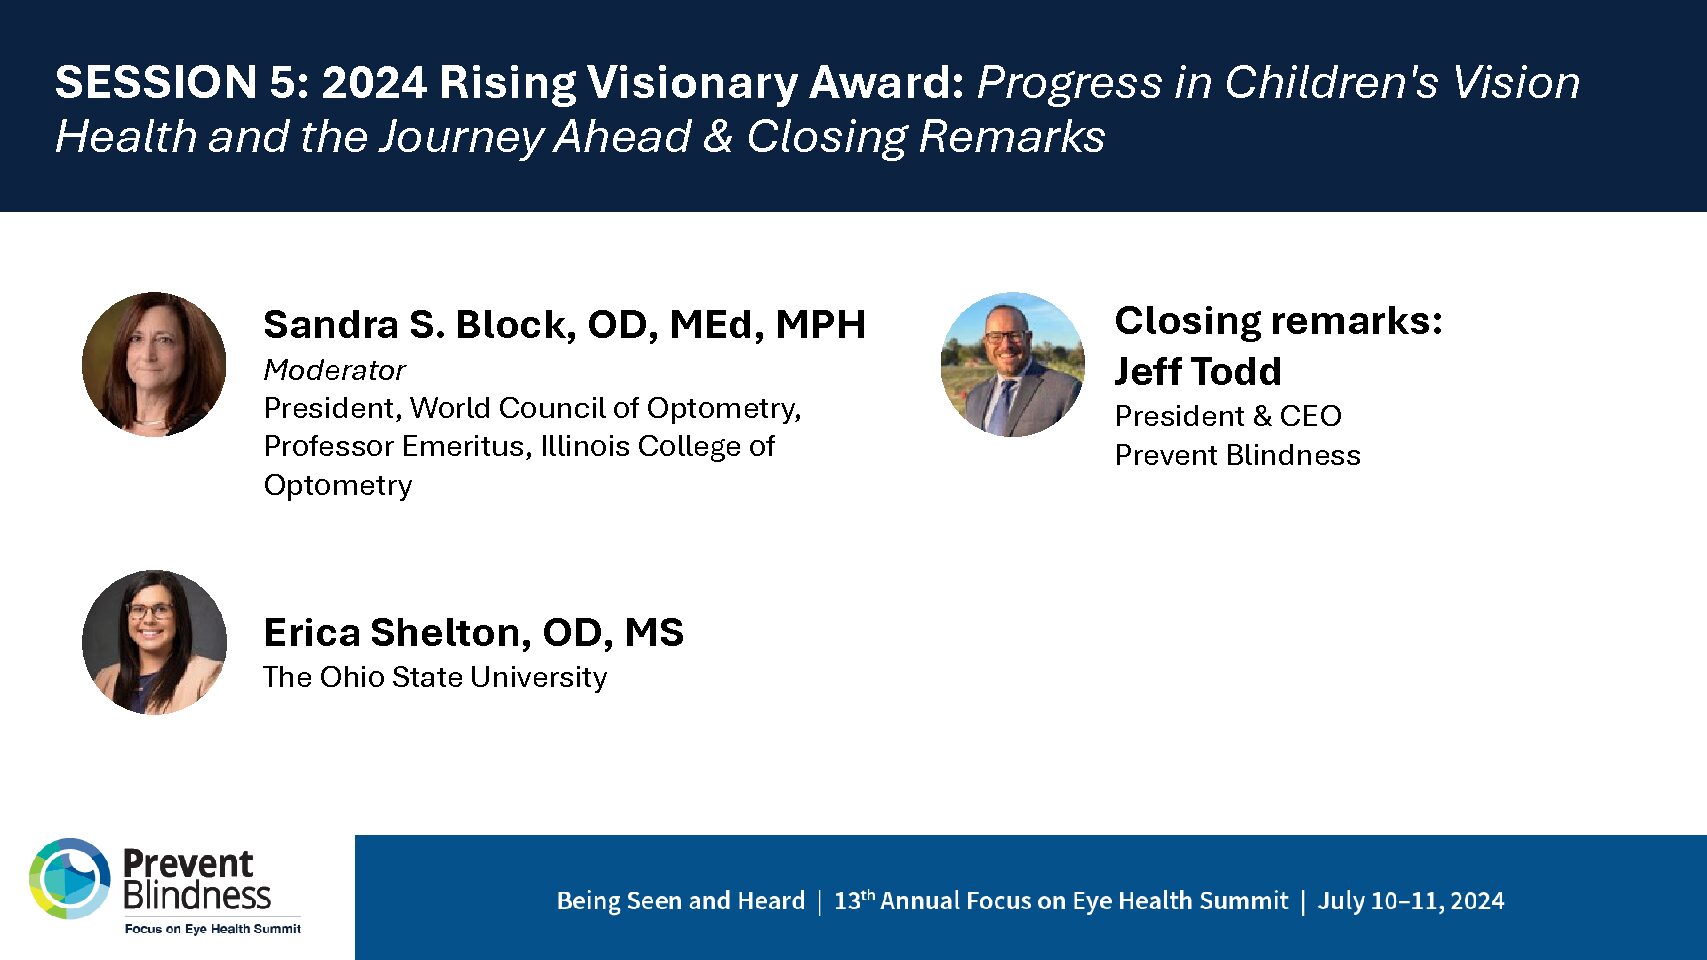 Progress in Children’s Vision Health and the Journey Ahead